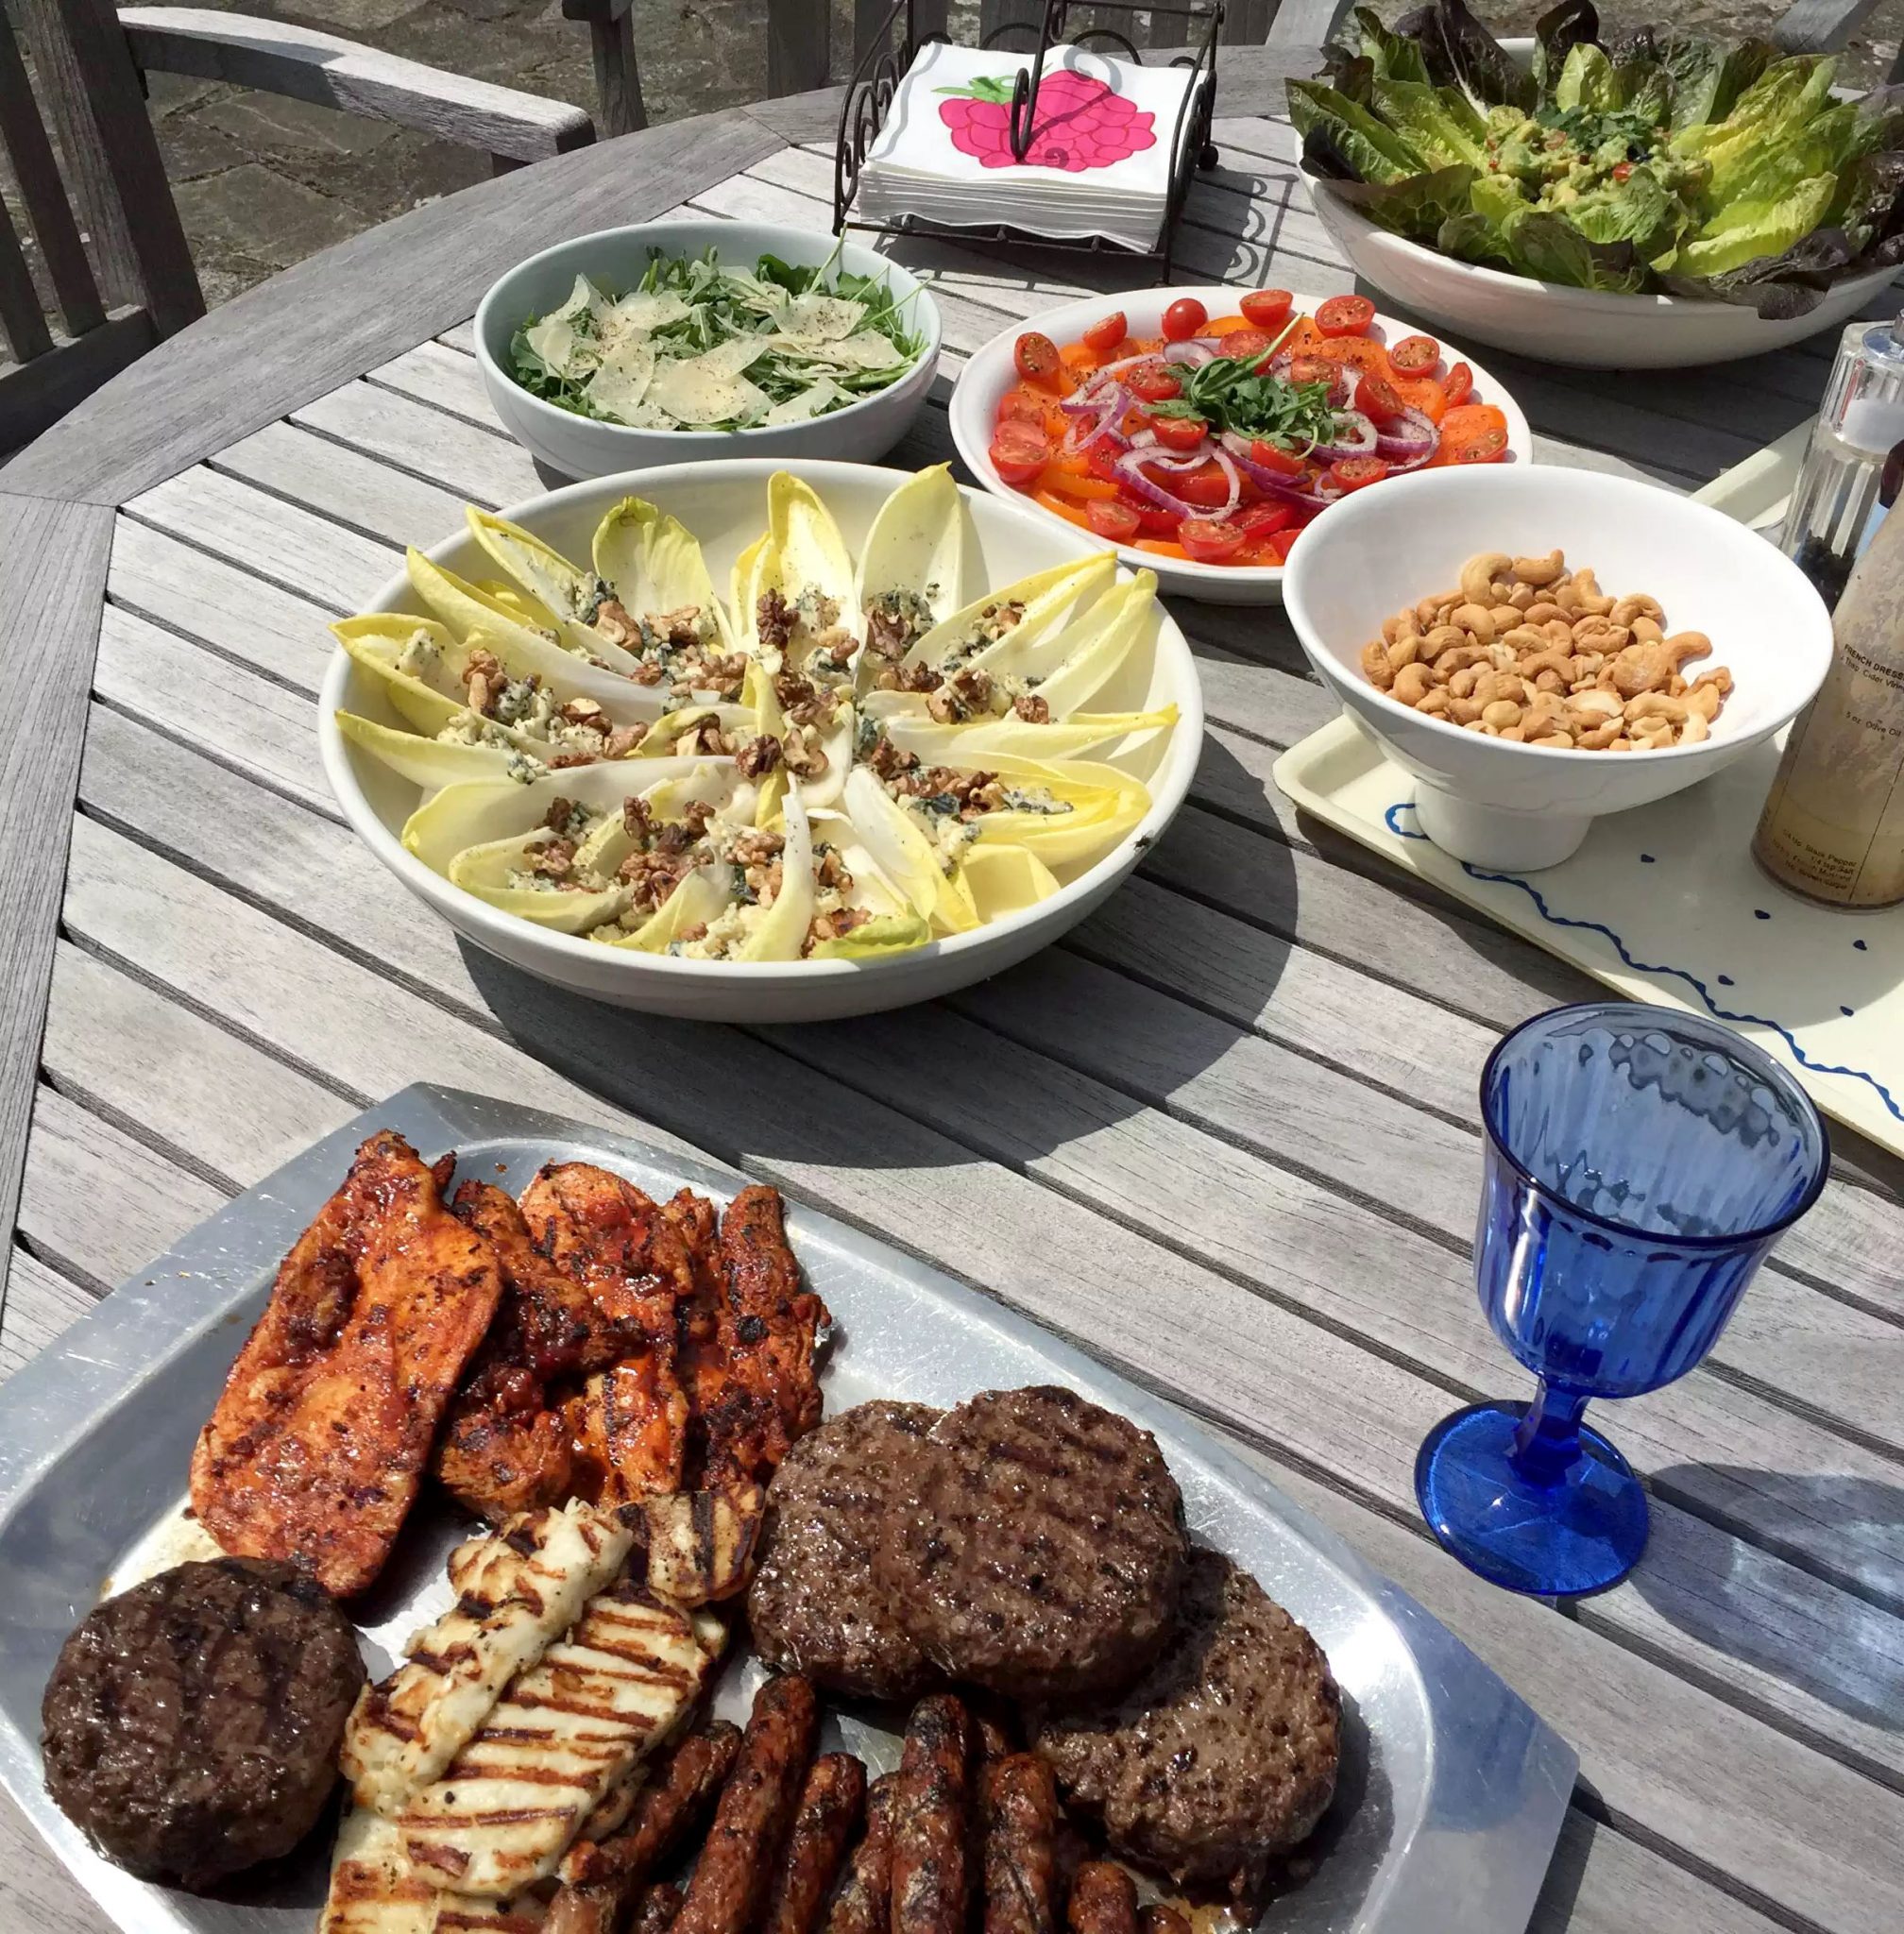 Fathers Day BBQ Marleys Family Sunshine Outdoor Dining Garden Celebration Meat Salads BBQ Lunch Healthy